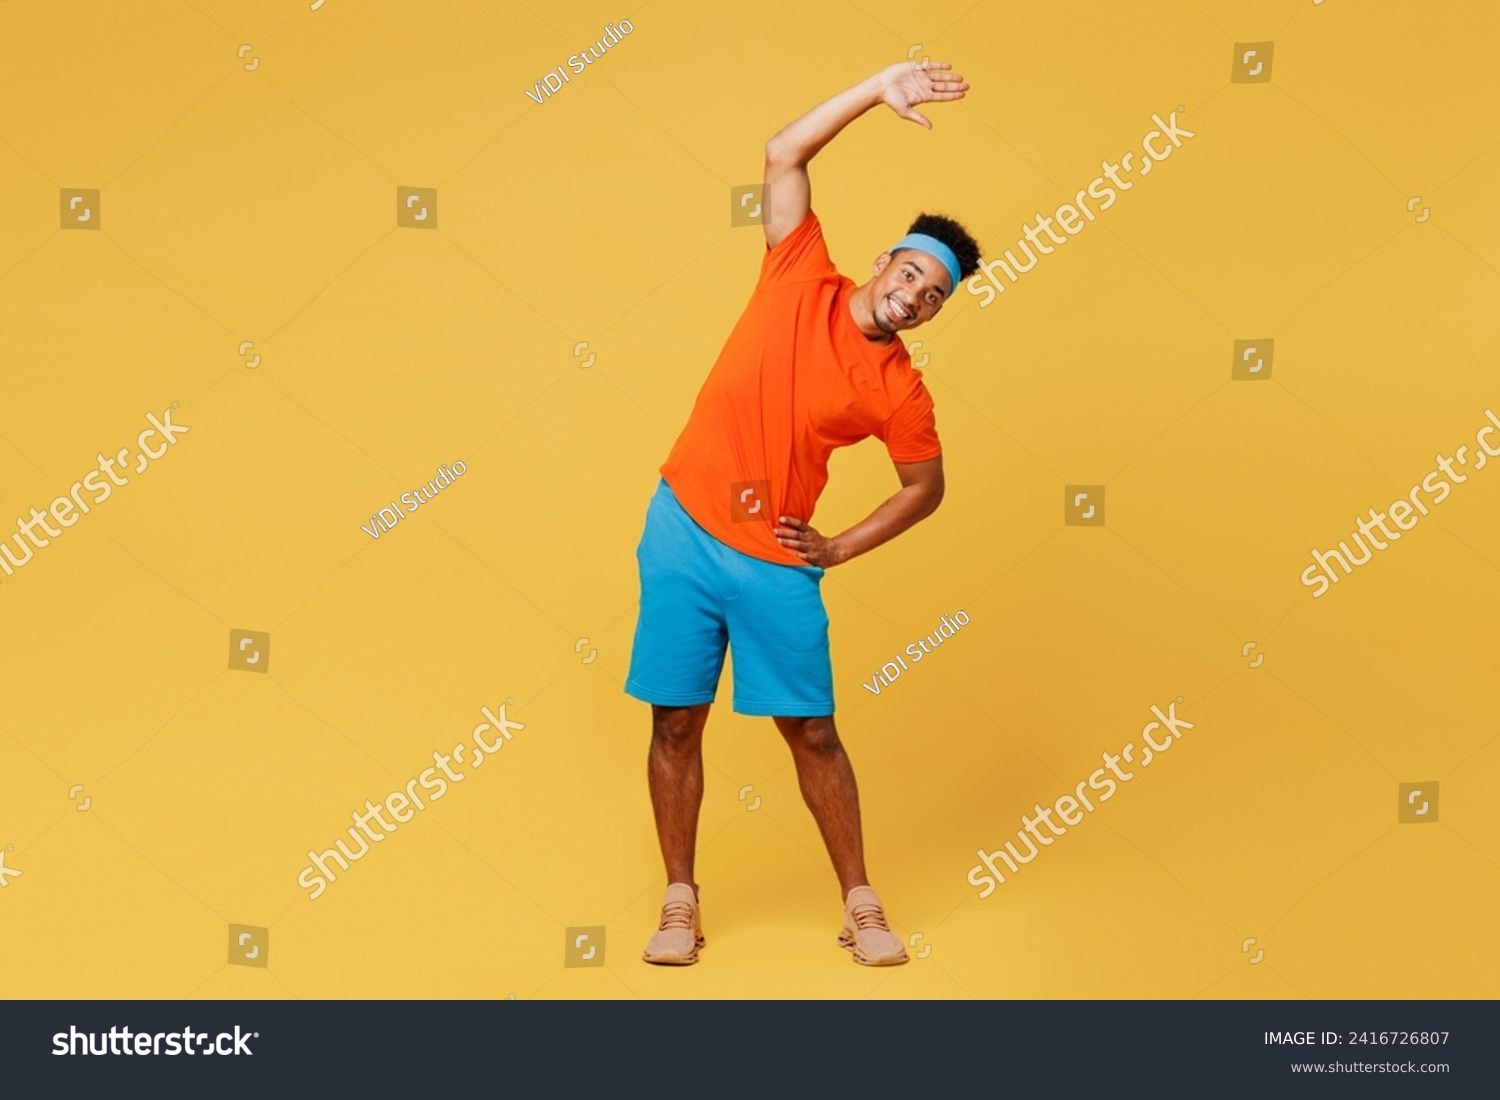 Full body young fitness trainer sporty man sportsman wear orange t-shirt do stretch lunge exercise rising hands up train in home gym isolated on plain yellow background. Workout sport fit abs concept #2416726807